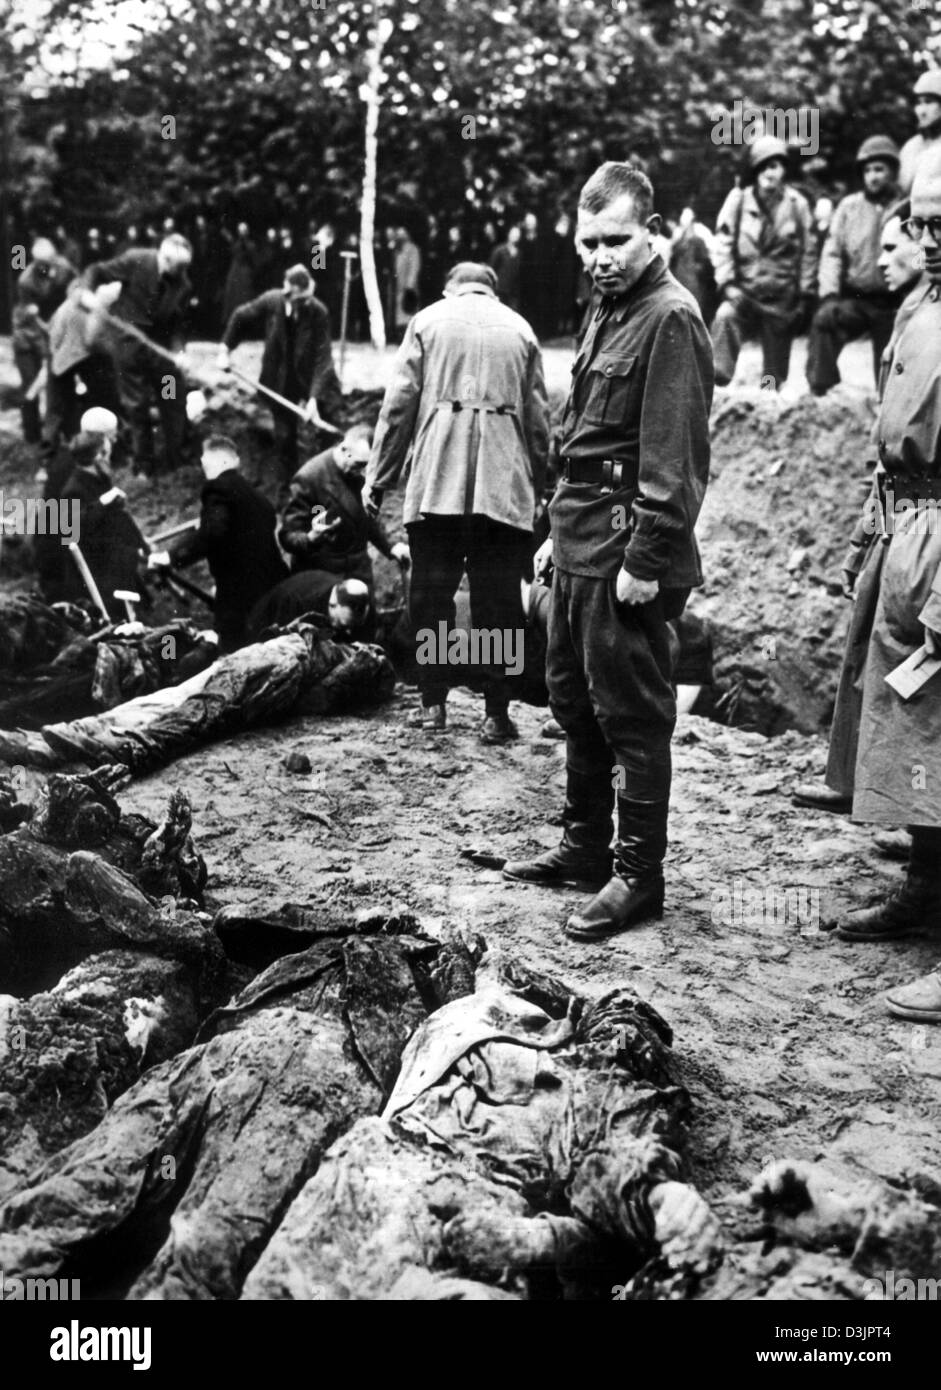 (dpa files) - A survivor from Russia (C) stands in front of his exhumed comrades as German civilians and members of the NSDAP are being ordered to transfere more than 200 corpses to another grave under US supervision in Wuelfel, Germany, 02 May 1945. Russian POWs were murdered by their guards on the way to another concentration camp in Wuelfel, near Hanover, Germany on 08 April 194 Stock Photo